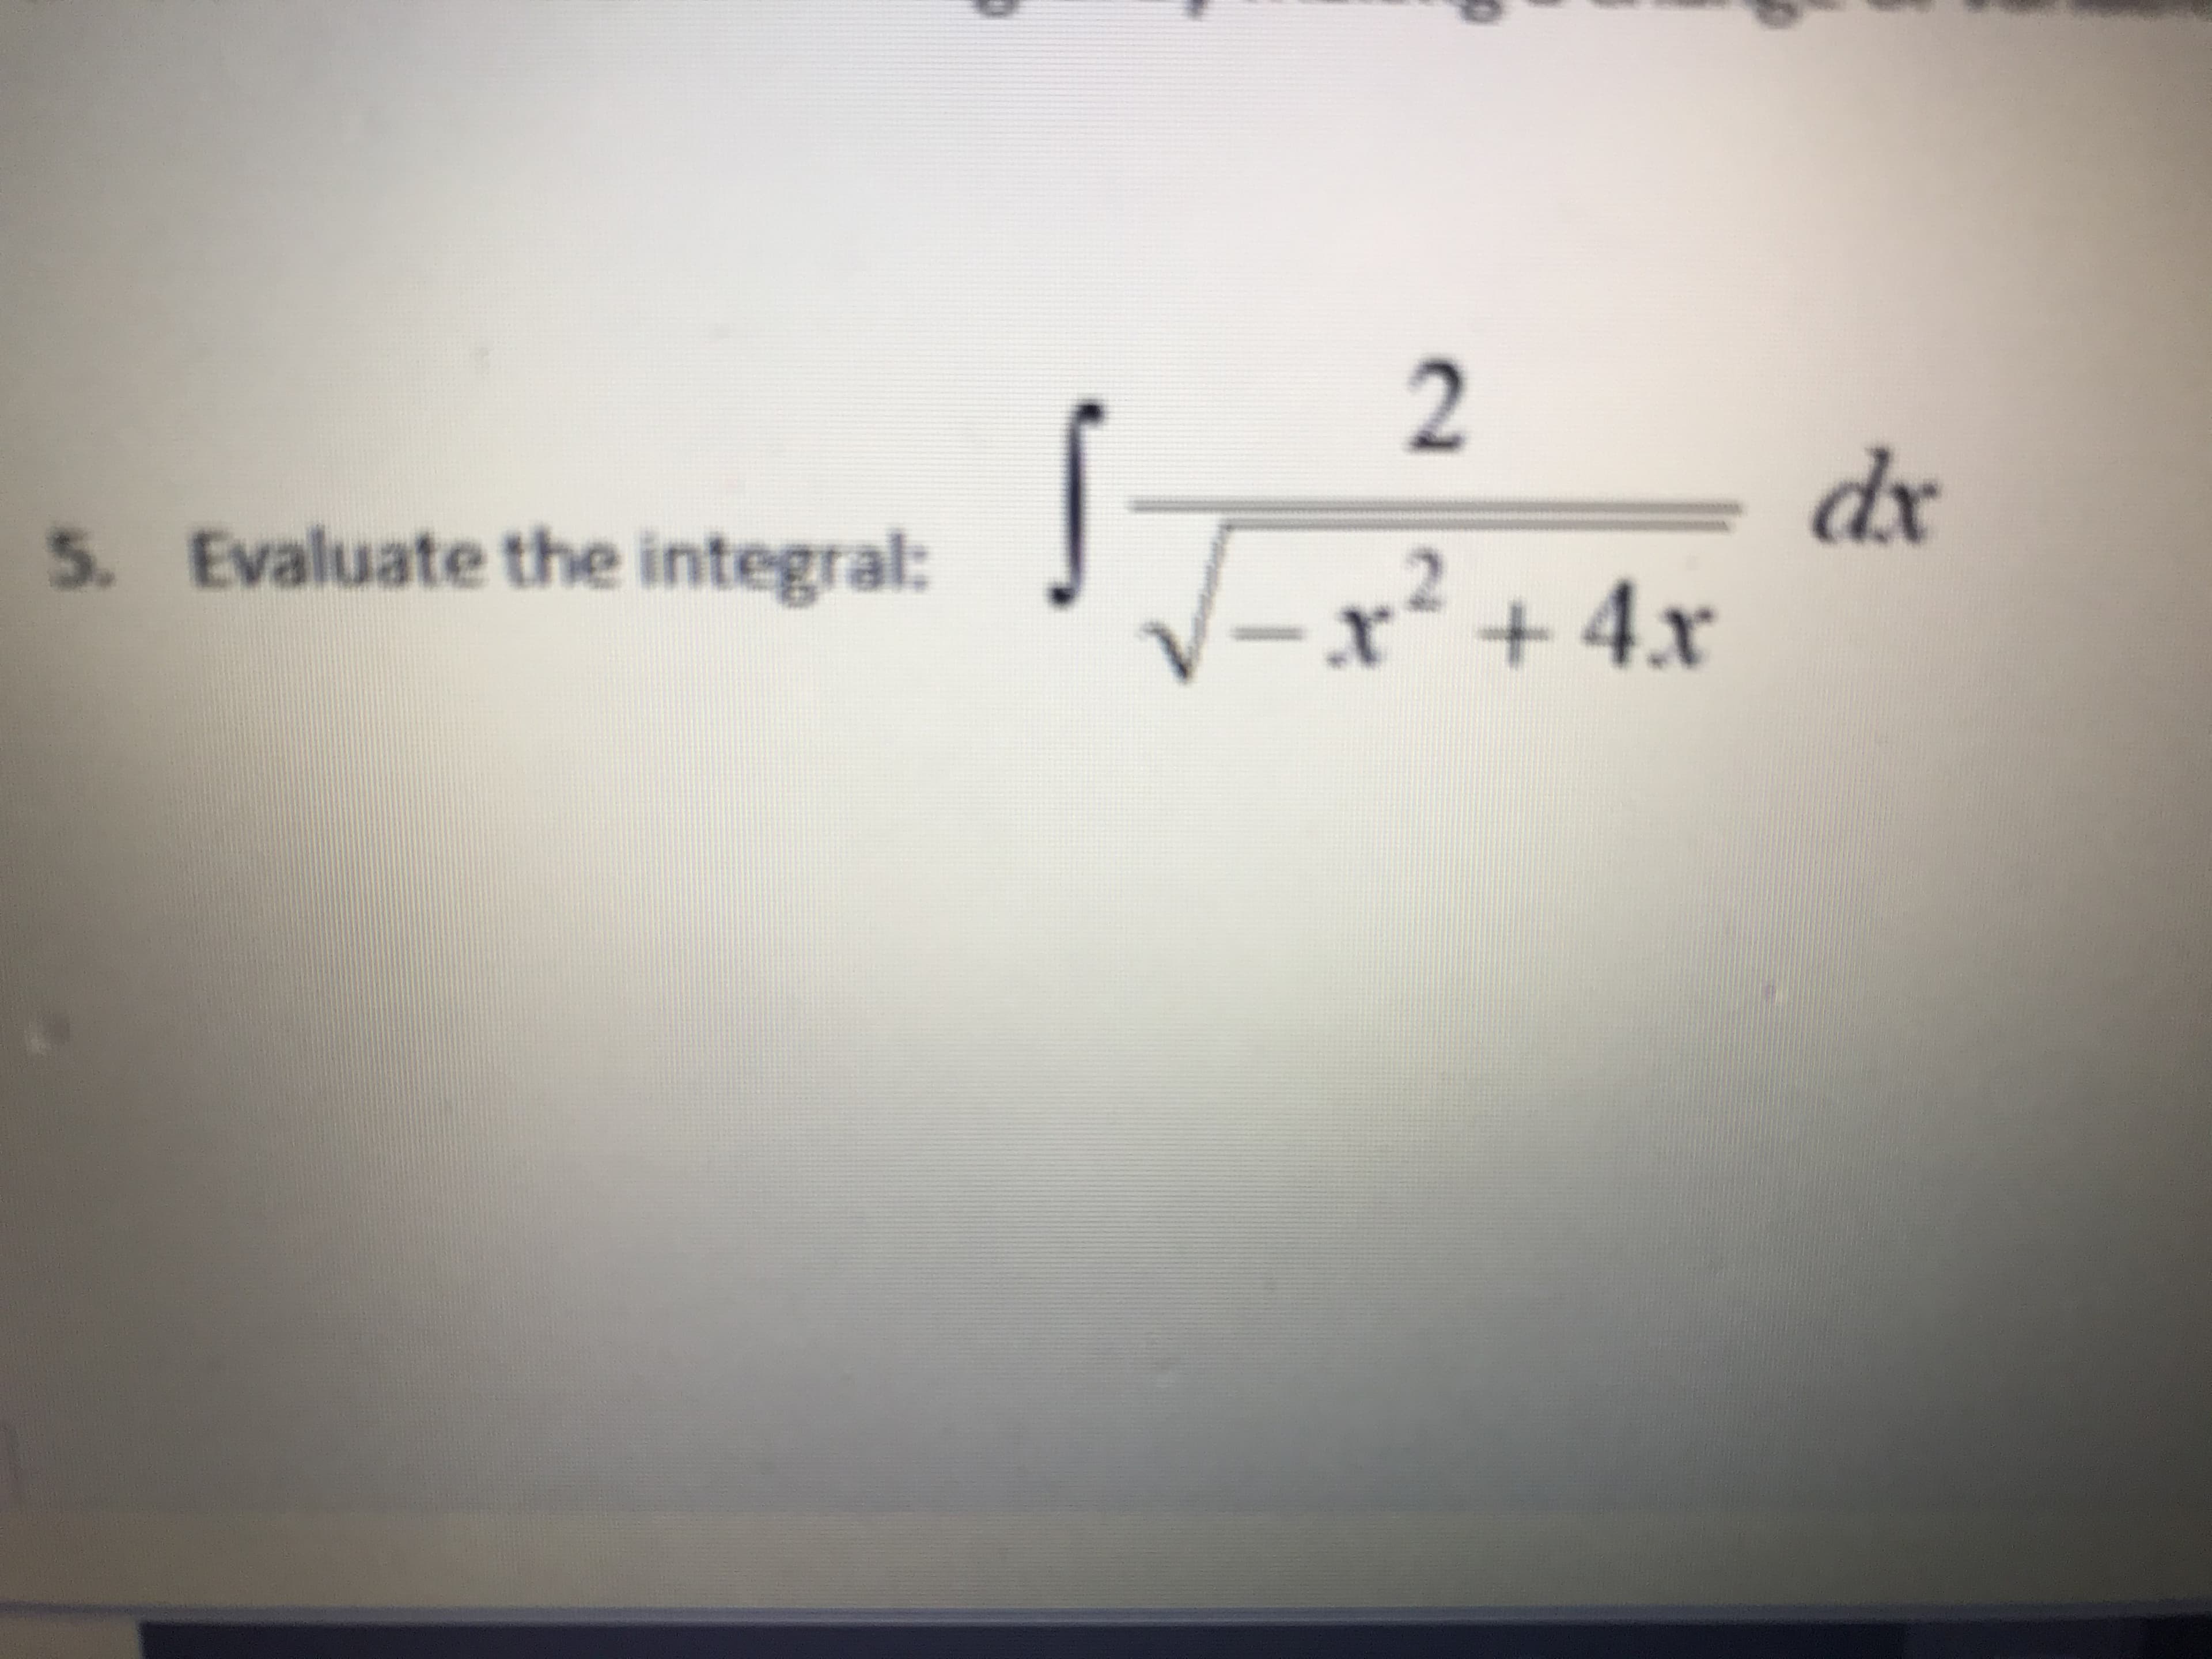 2
dx
x 4x
5. Evaluate the integral:
2
